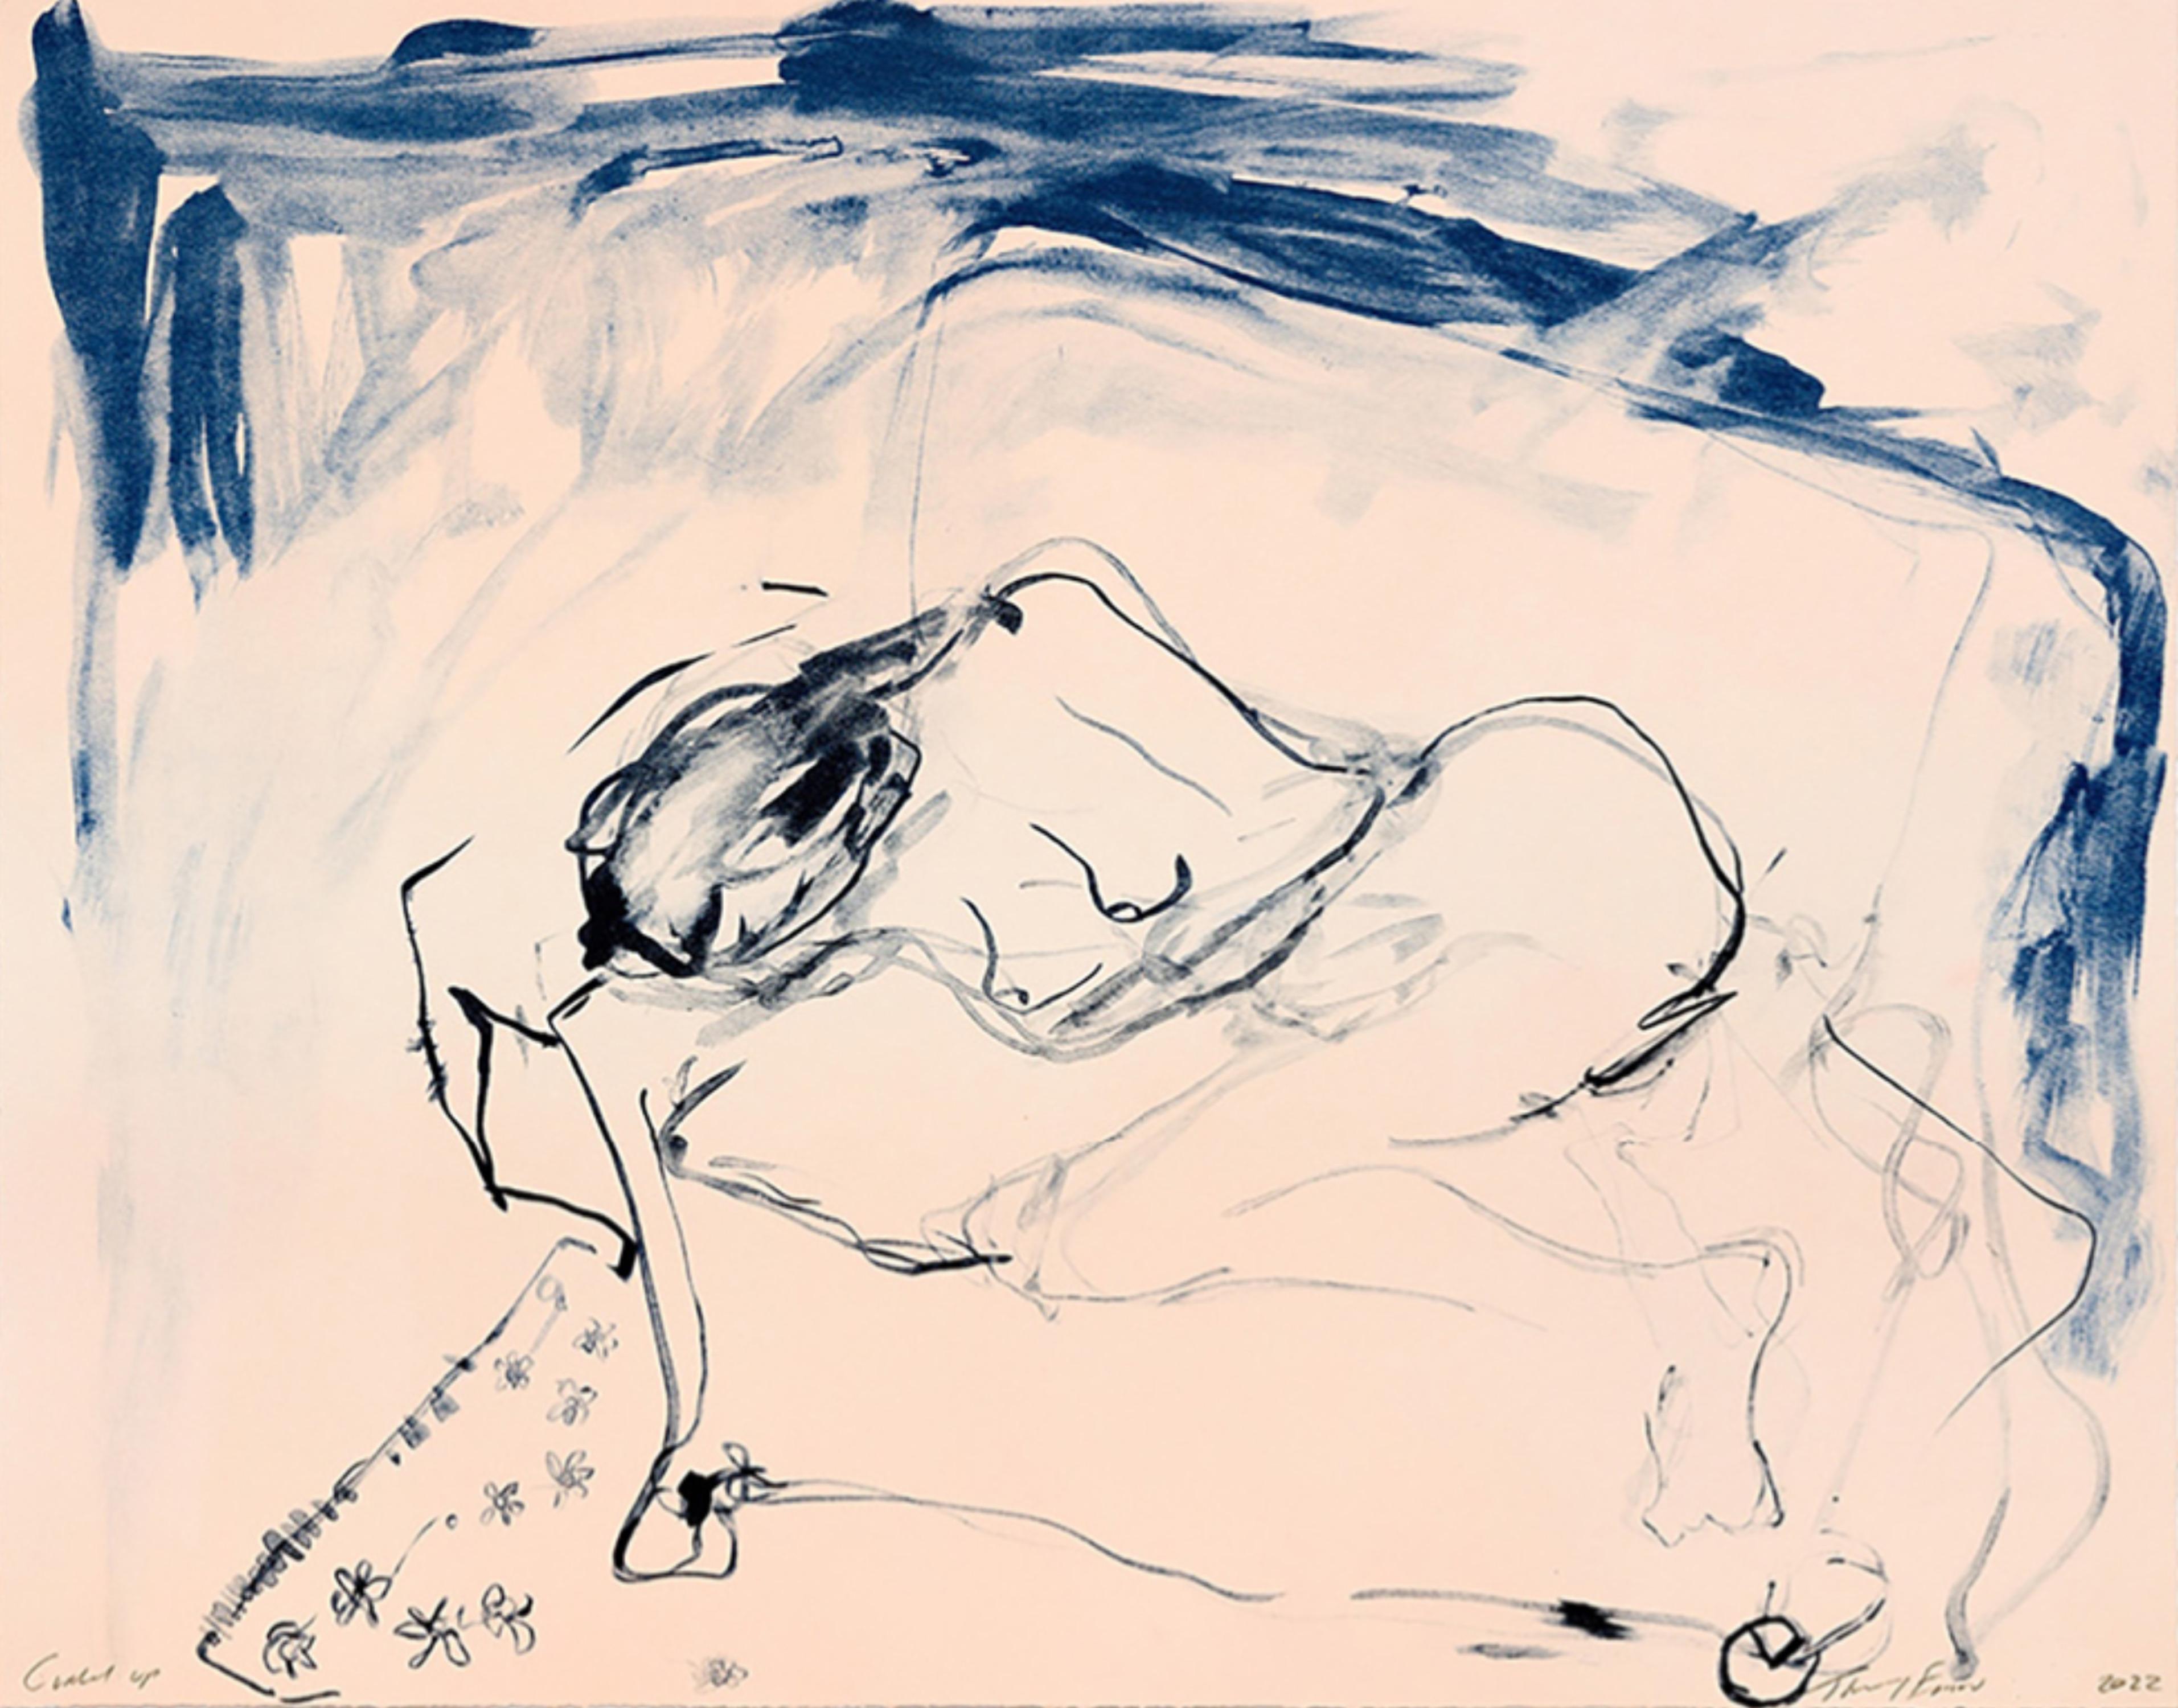 Curled Up - Print by Tracey Emin